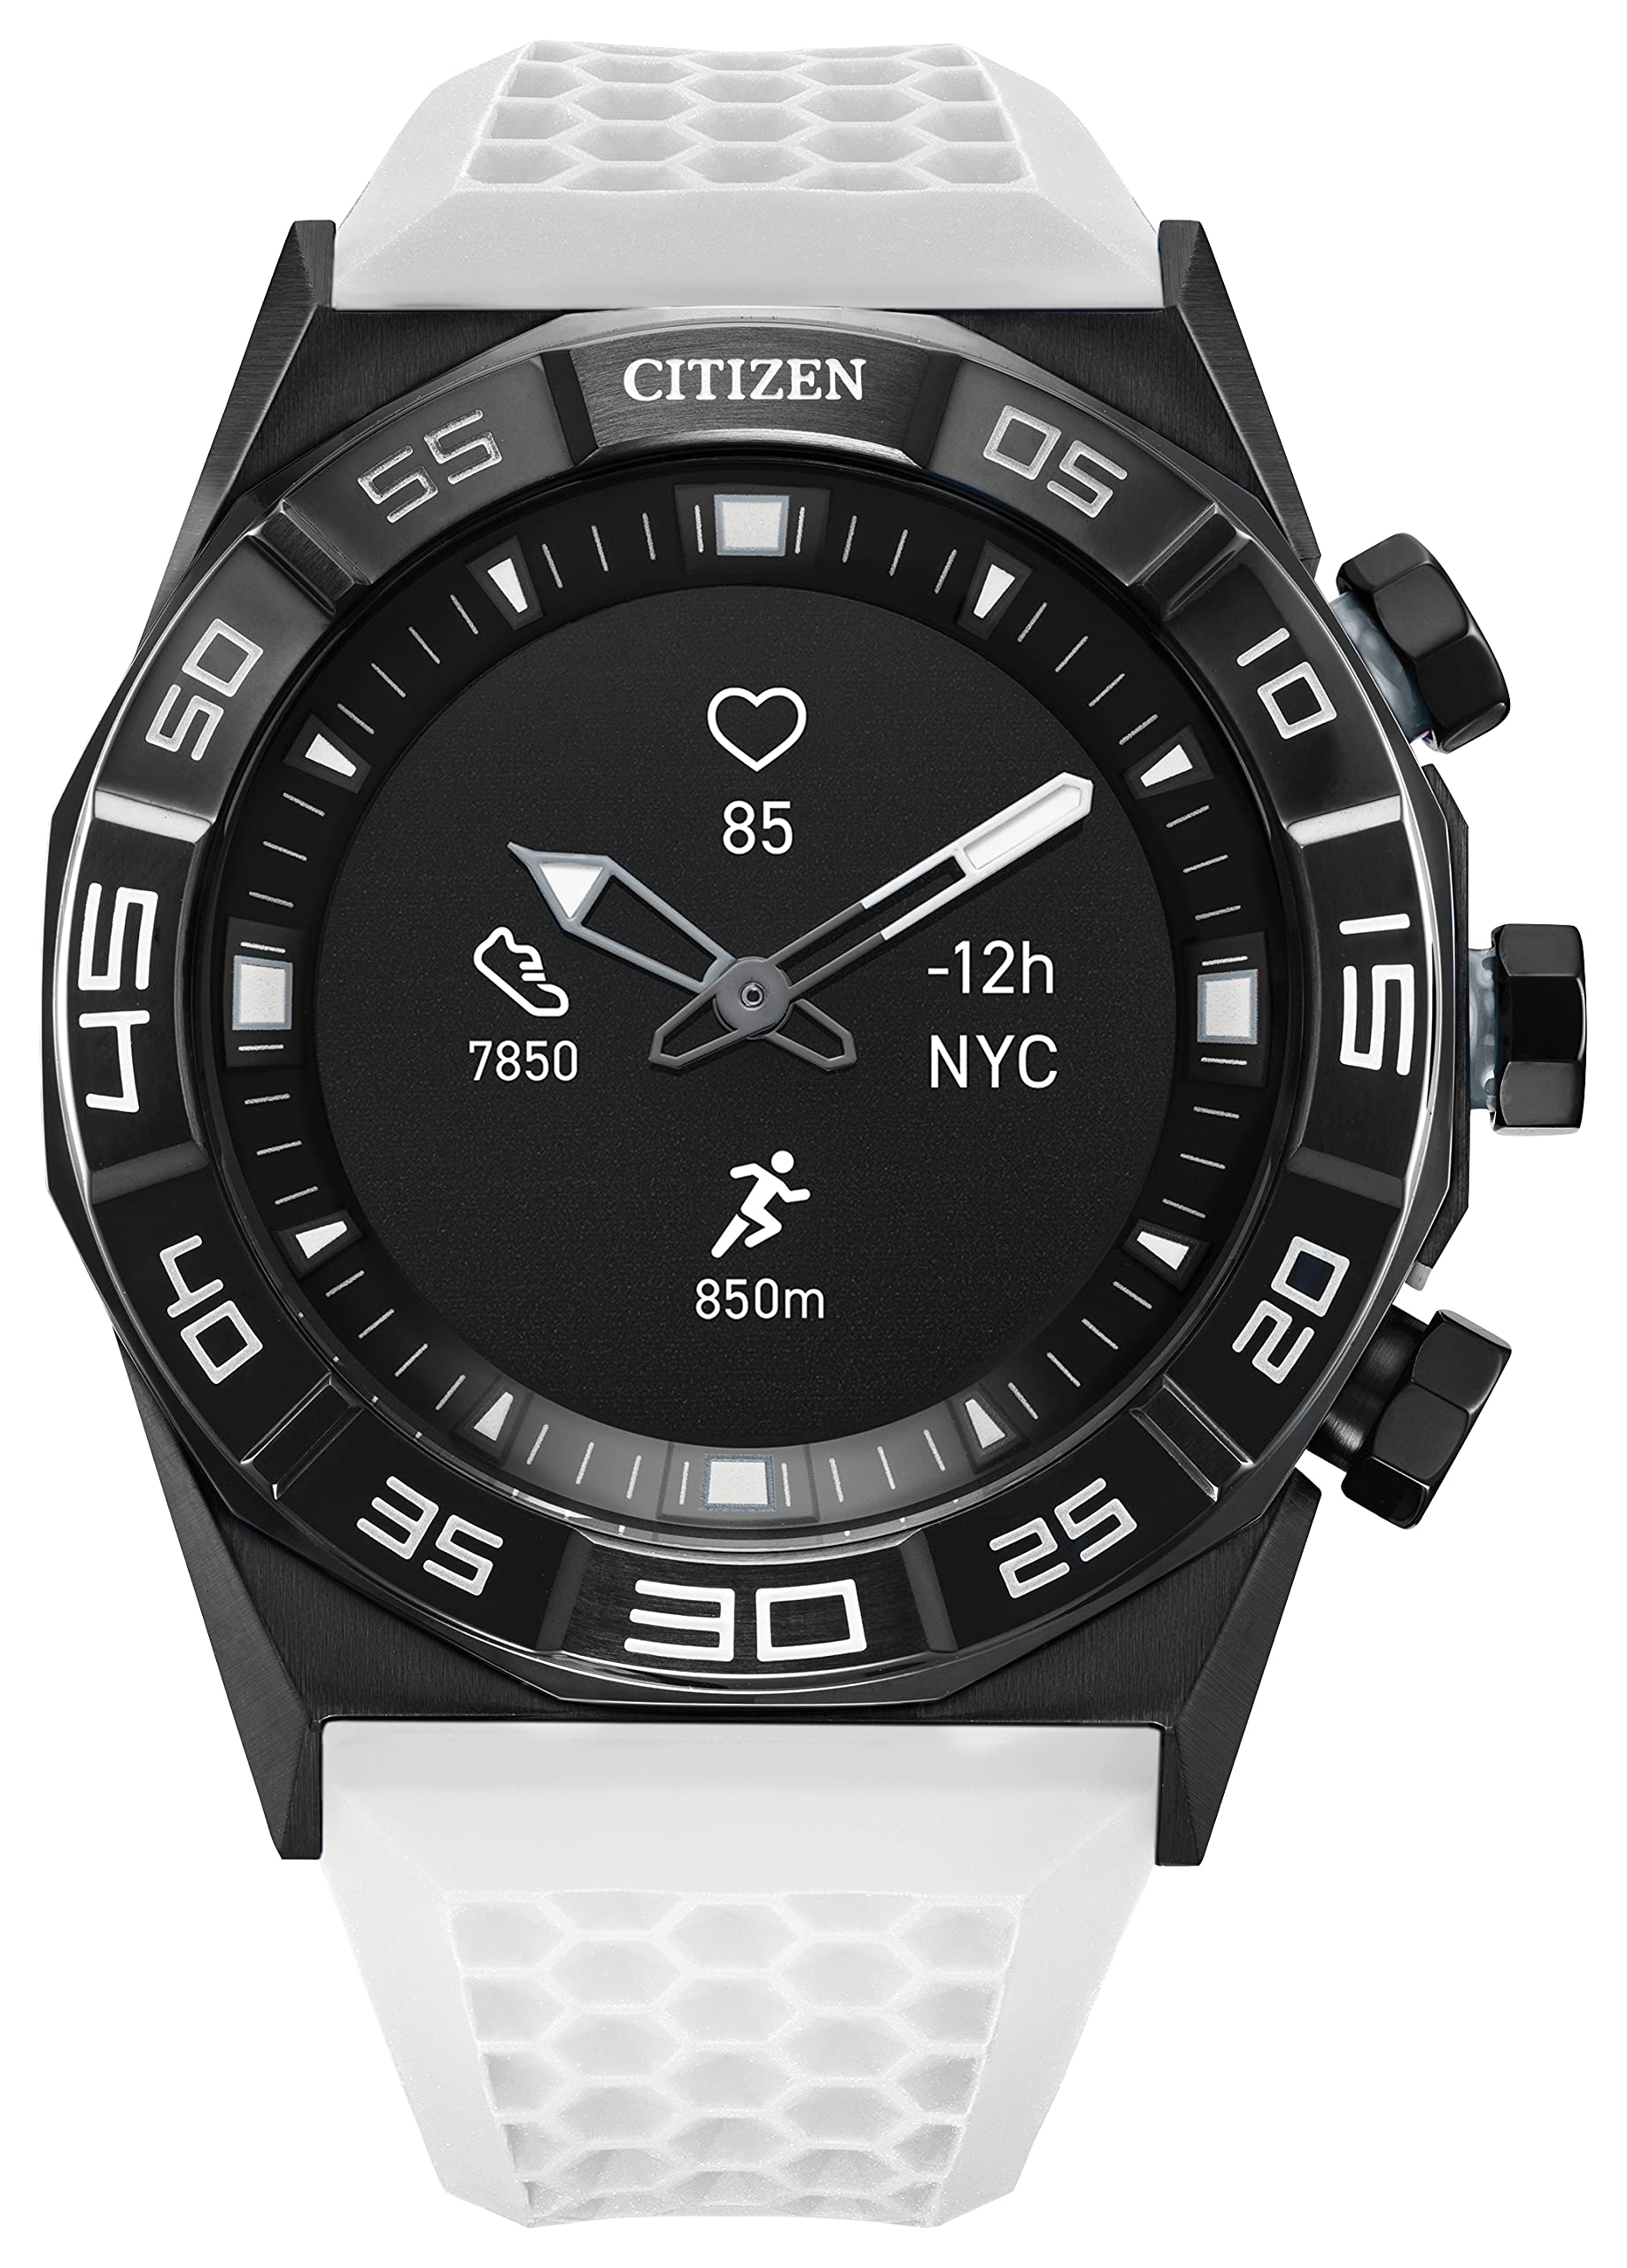 Mua Citizen CZ Smart Gen 1 Hybrid smartwatch 44mm, Continuous Heart Rate  Tracking, Fitness Activity, Golf App, Displays Notifications and Messages,  Bluetooth Connection, 15 Day Battery Life trên Amazon Mỹ chính hãng 2023 |  Giaonhan247